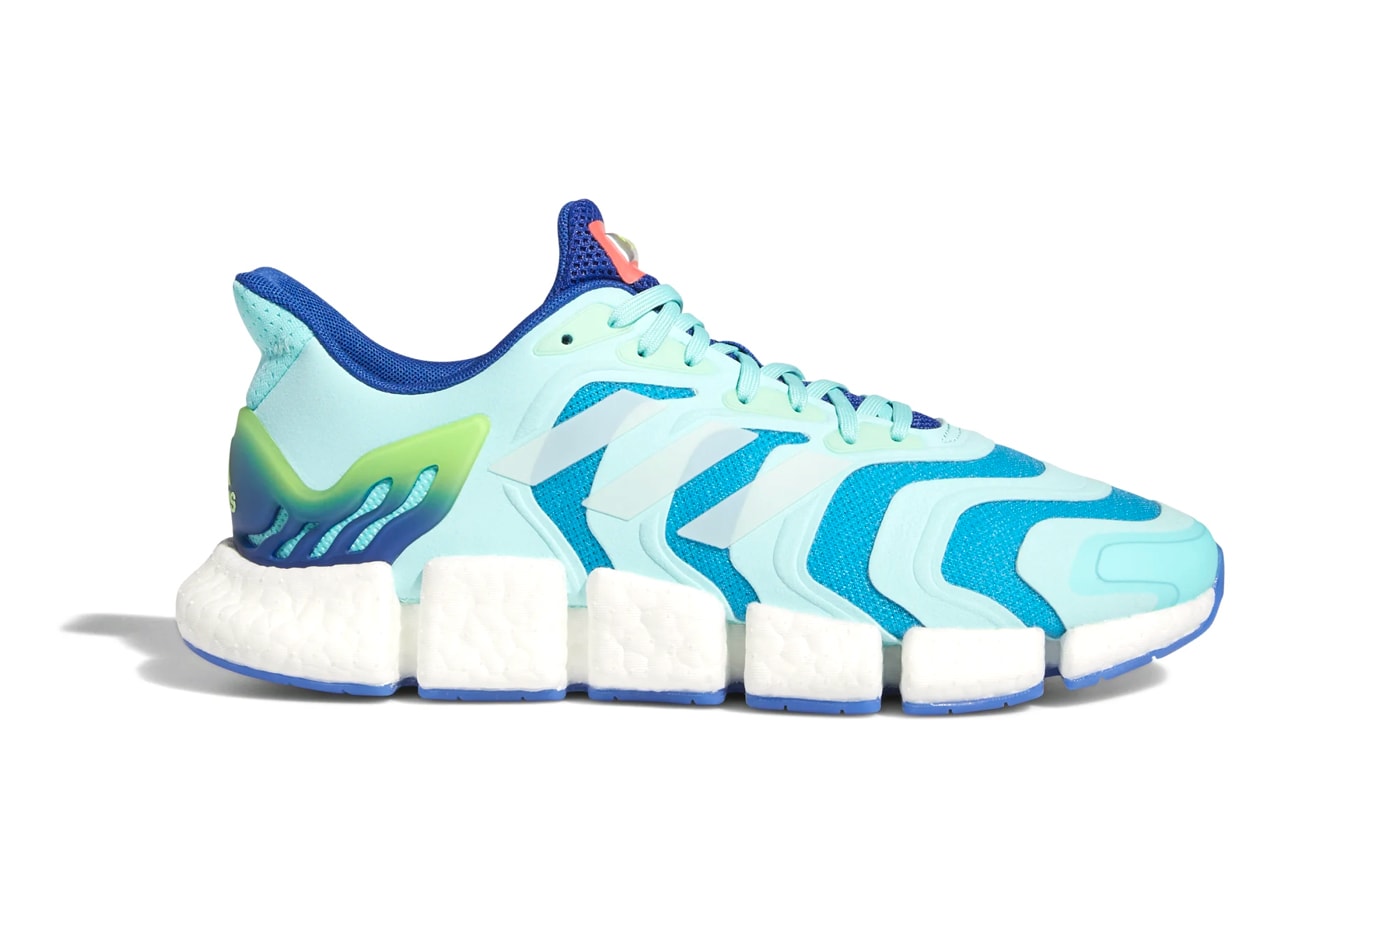 adidas Climacool Vento signal cyan shock pink signal green glow pink fx7847 fx4730 fx4731 fx7840 fx7841 fx7842 menswear streetwear footwear shoes sneaker trainers runners spring summer 2020 collection